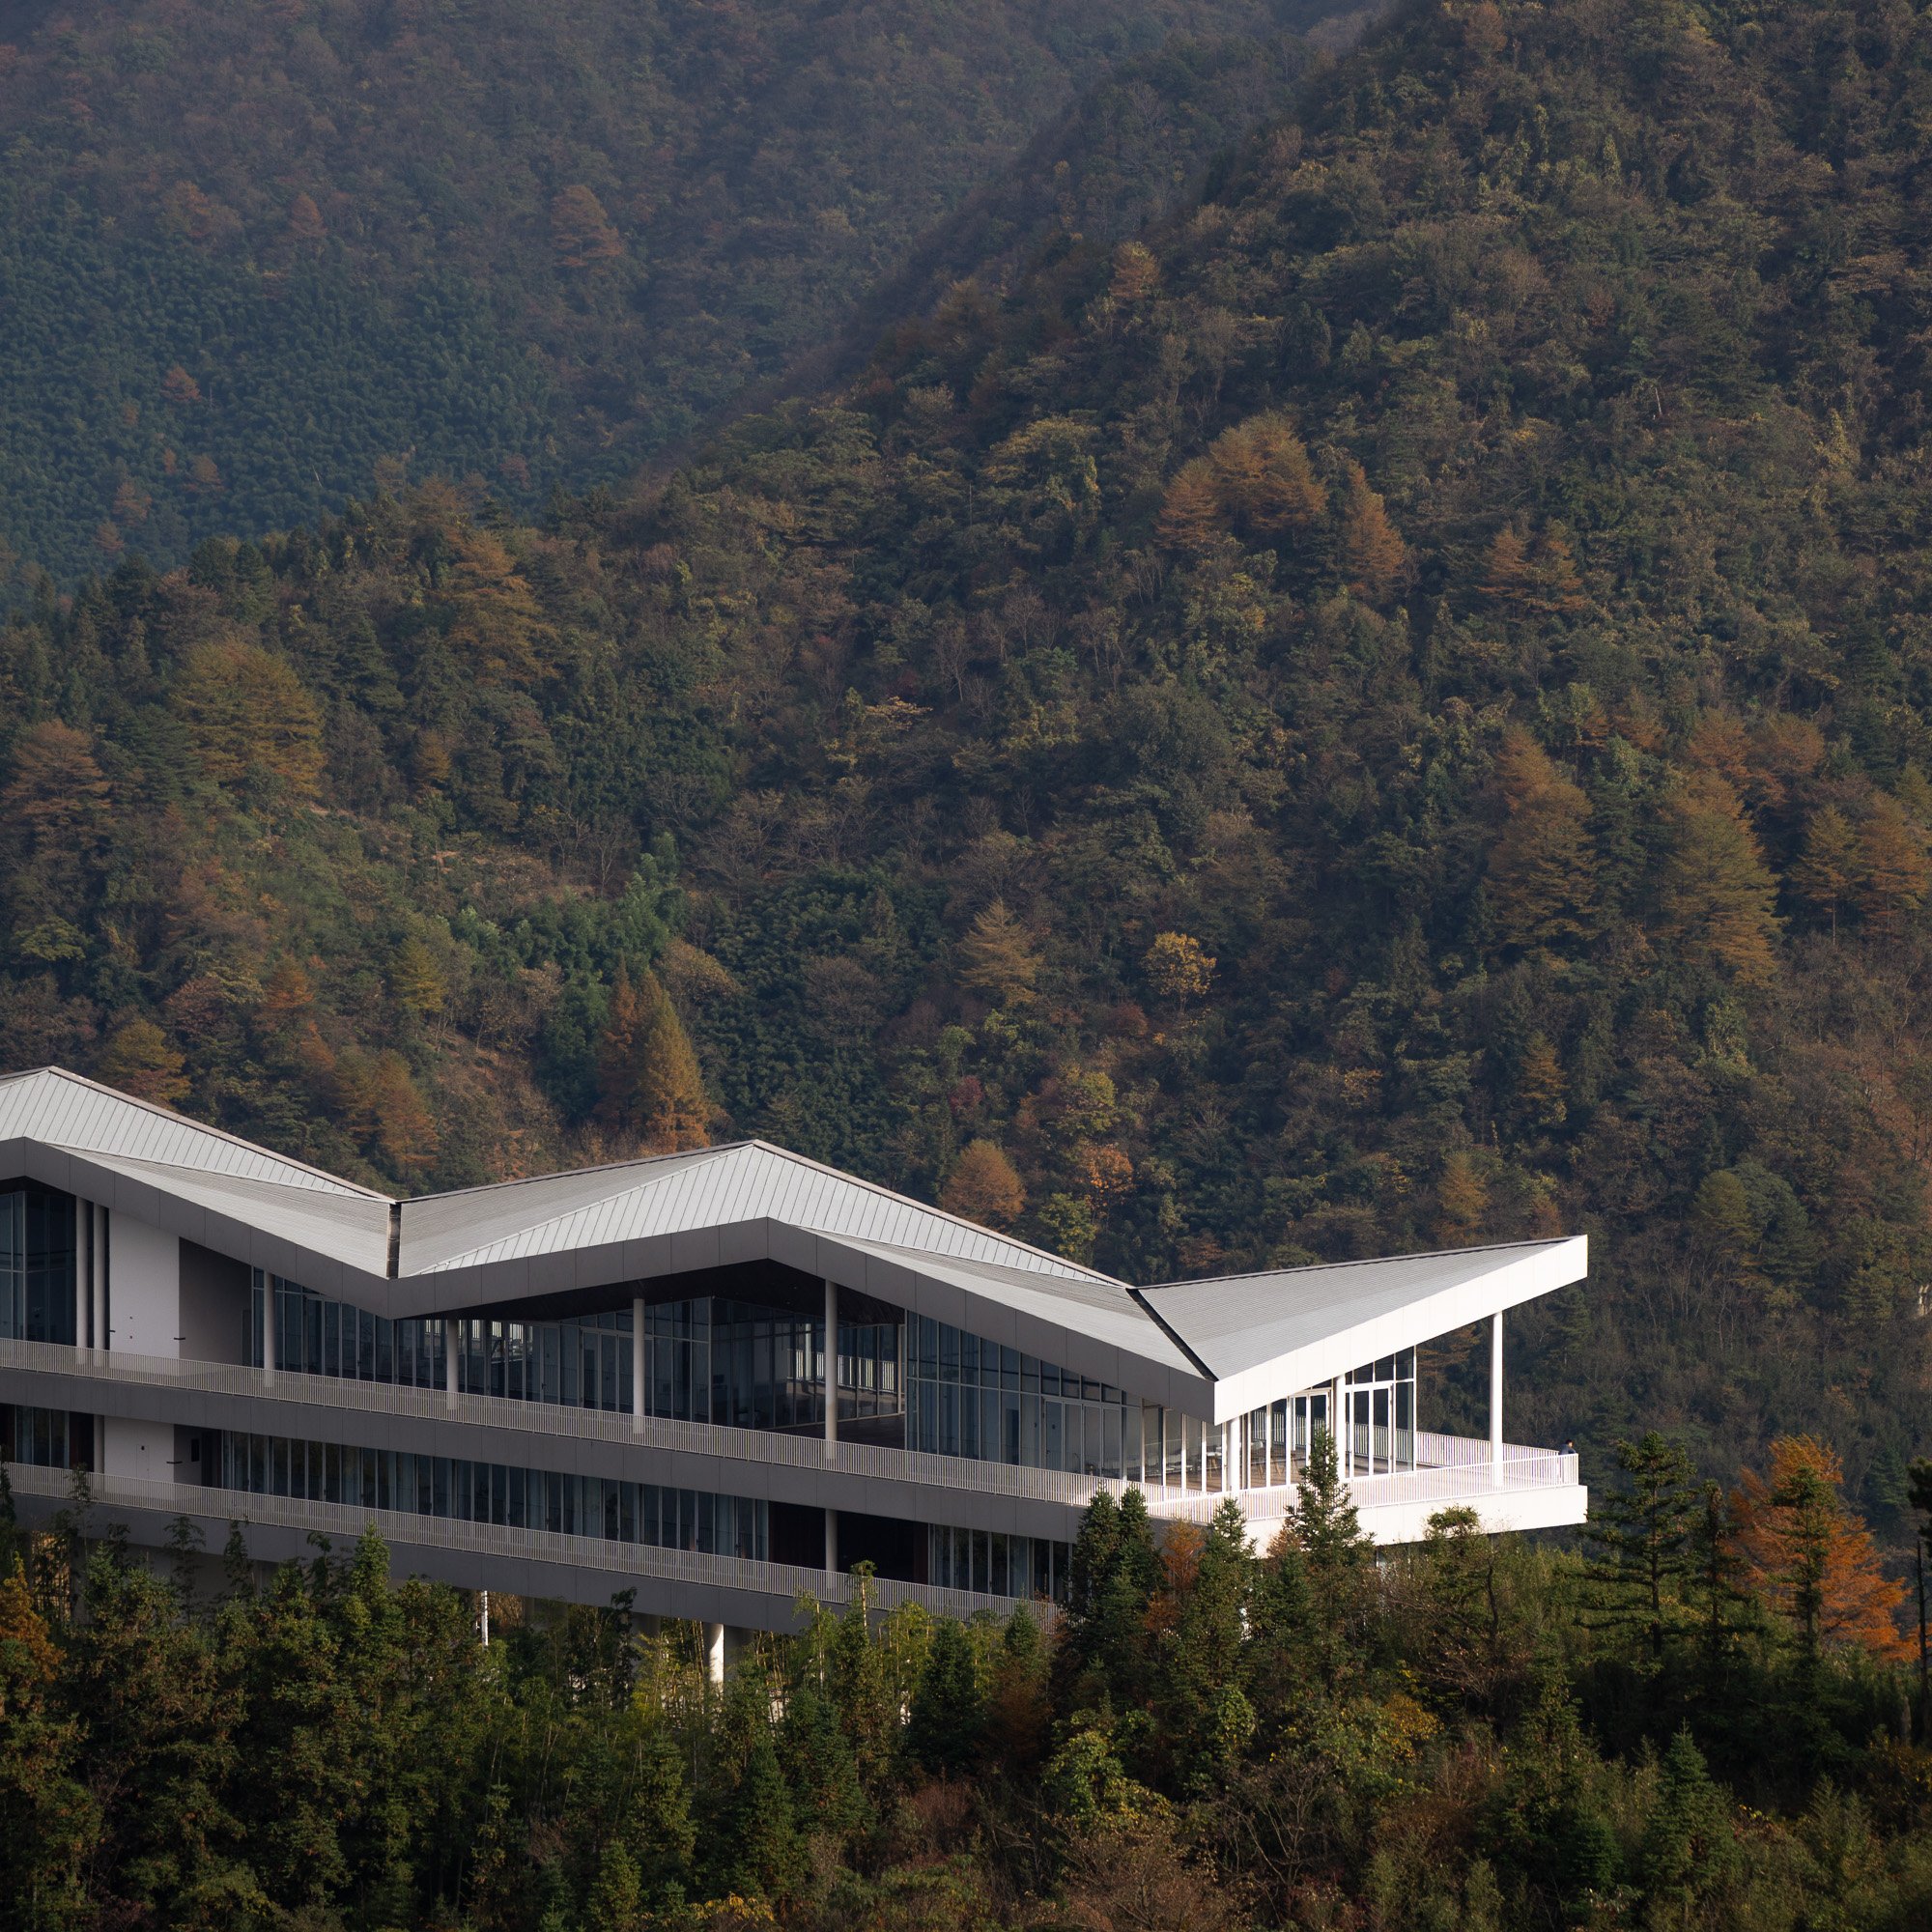 Floating Hotel - Anji, China - More Architecture 